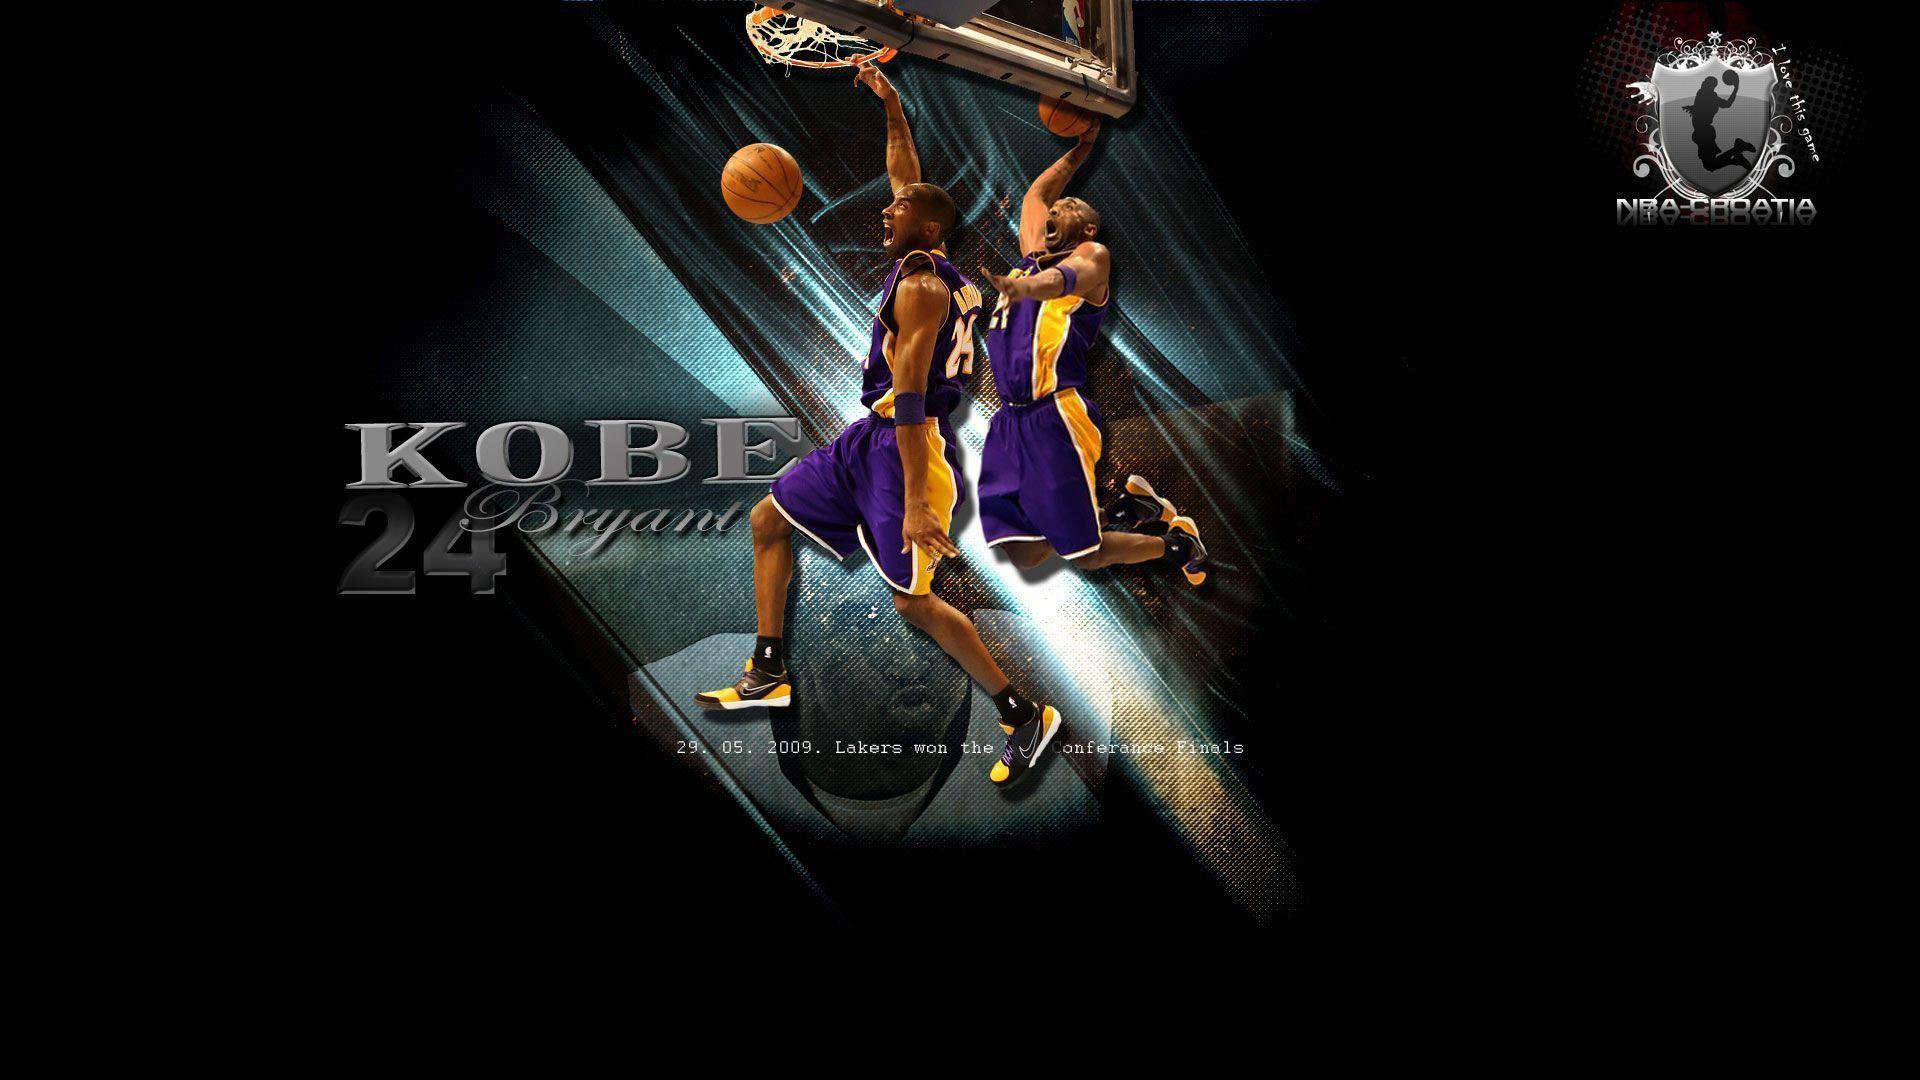 NBA Picture Gallery. Daily Wonderful Popular NBA Image